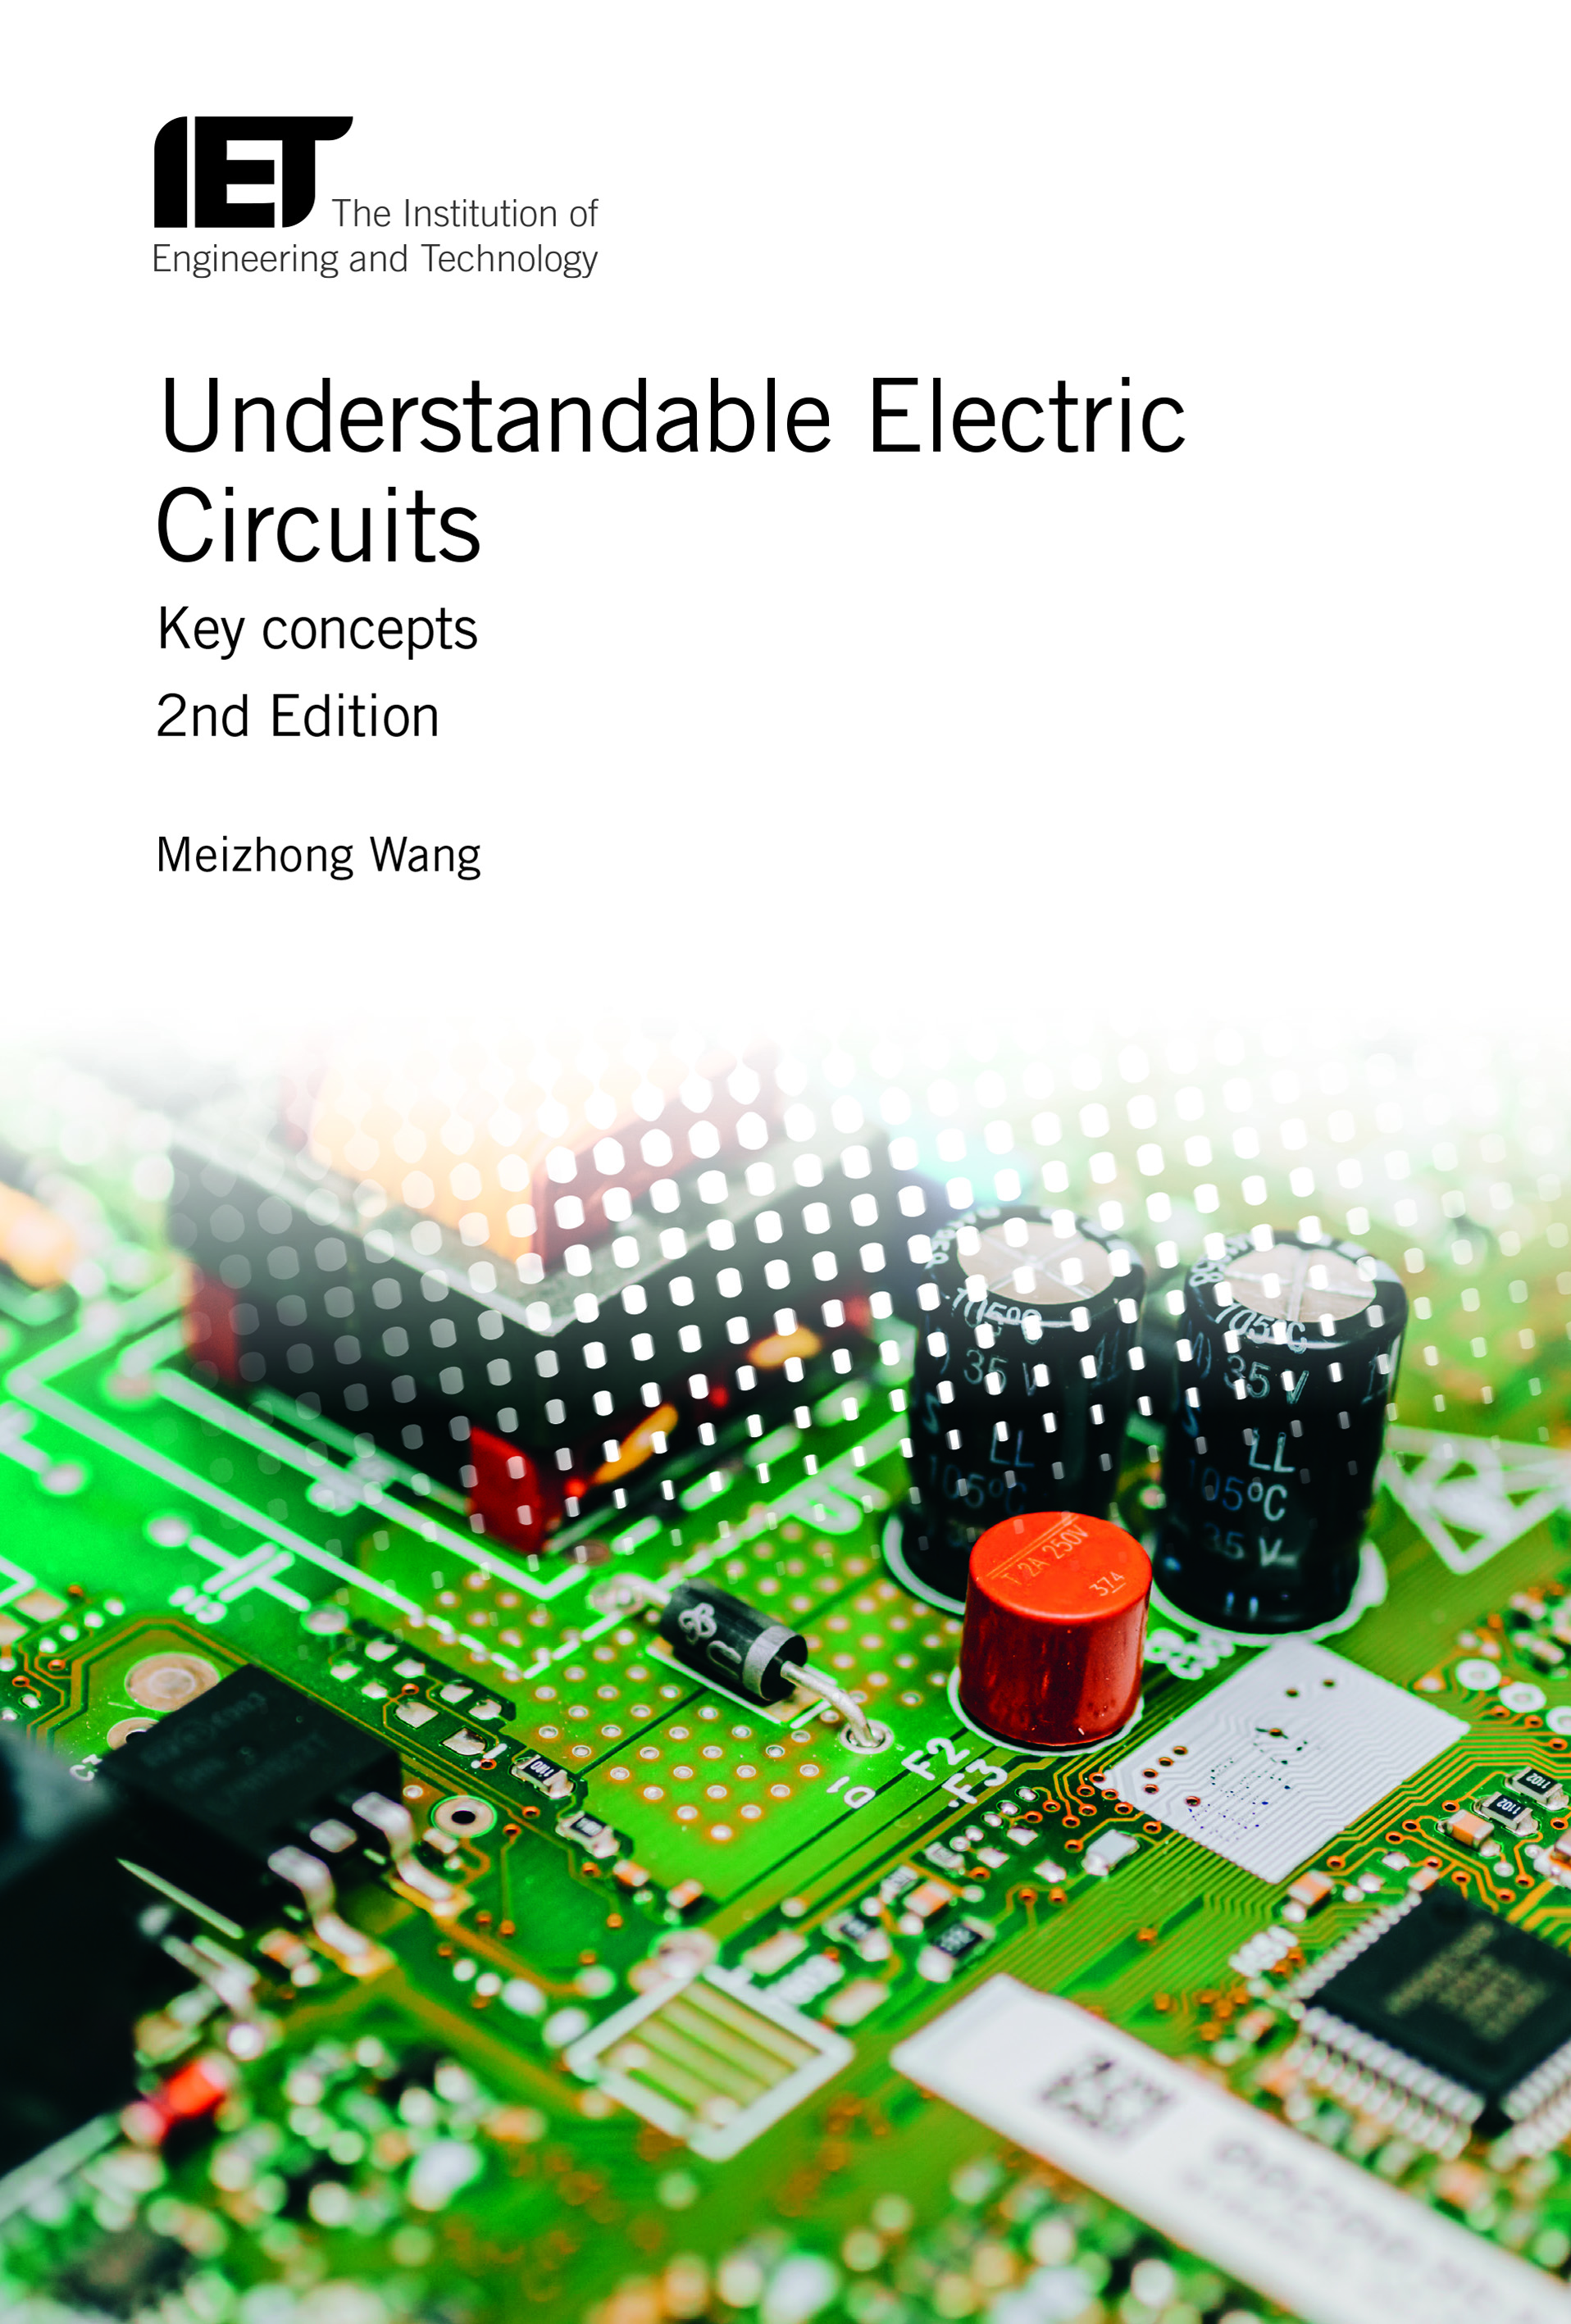 Understandable Electric Circuits, Key concepts, 2nd Edition